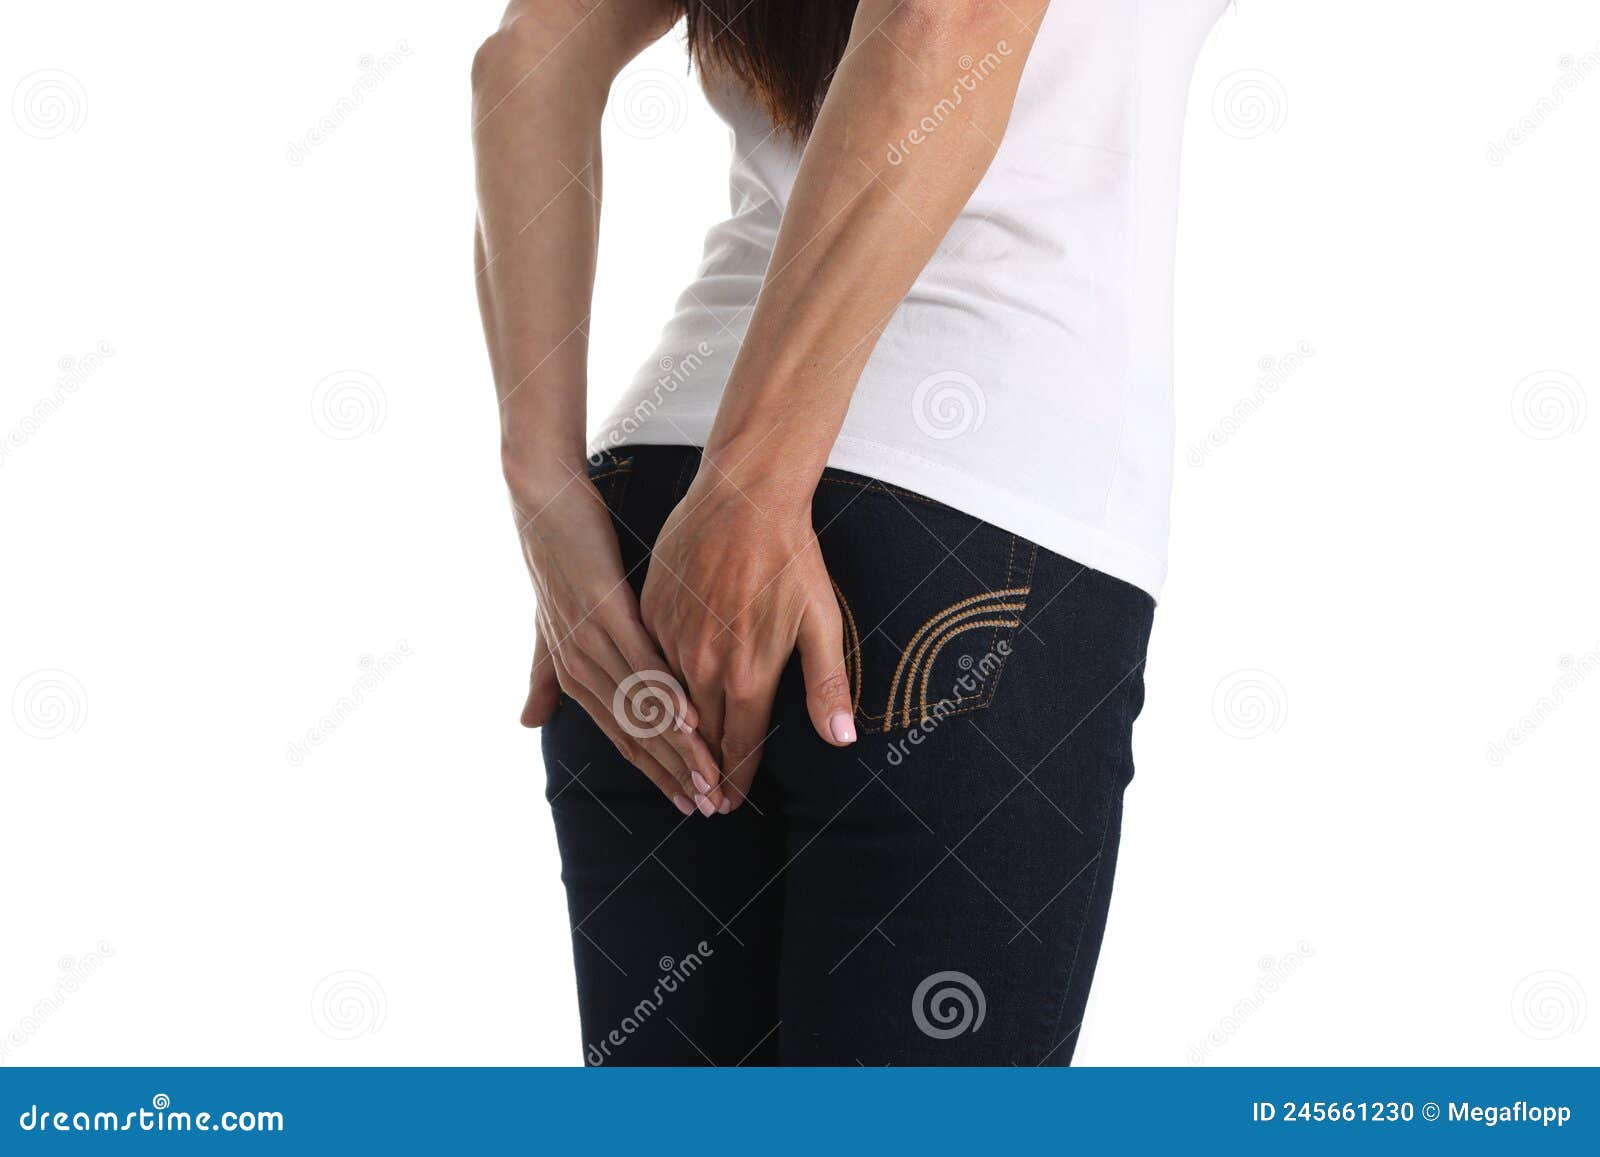 Woman Holds Hands On Anus With Stomach Problems Stock Photo Image Of Female Bladder